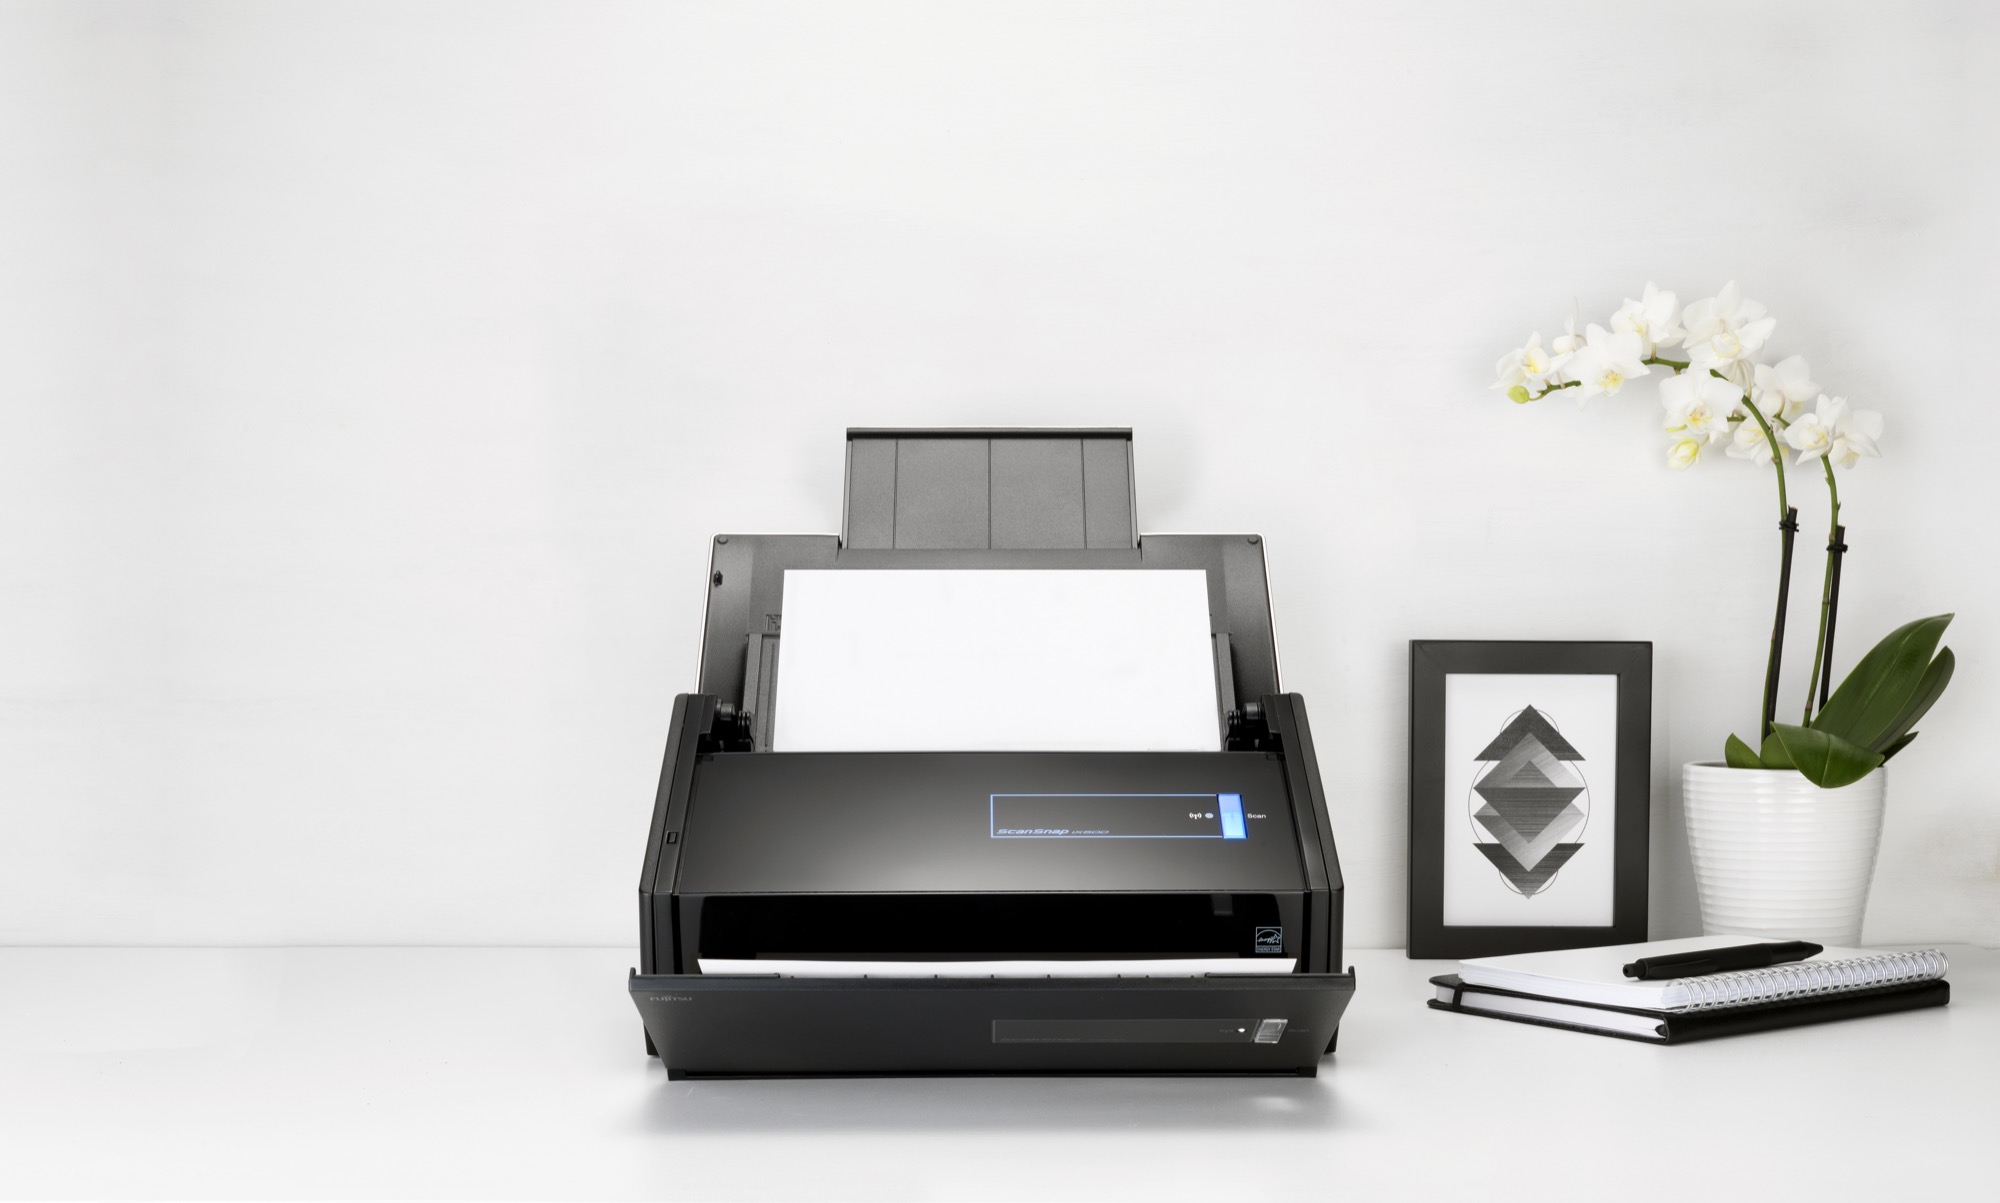 ScanSnap ix500 scanner with paper being scanned through